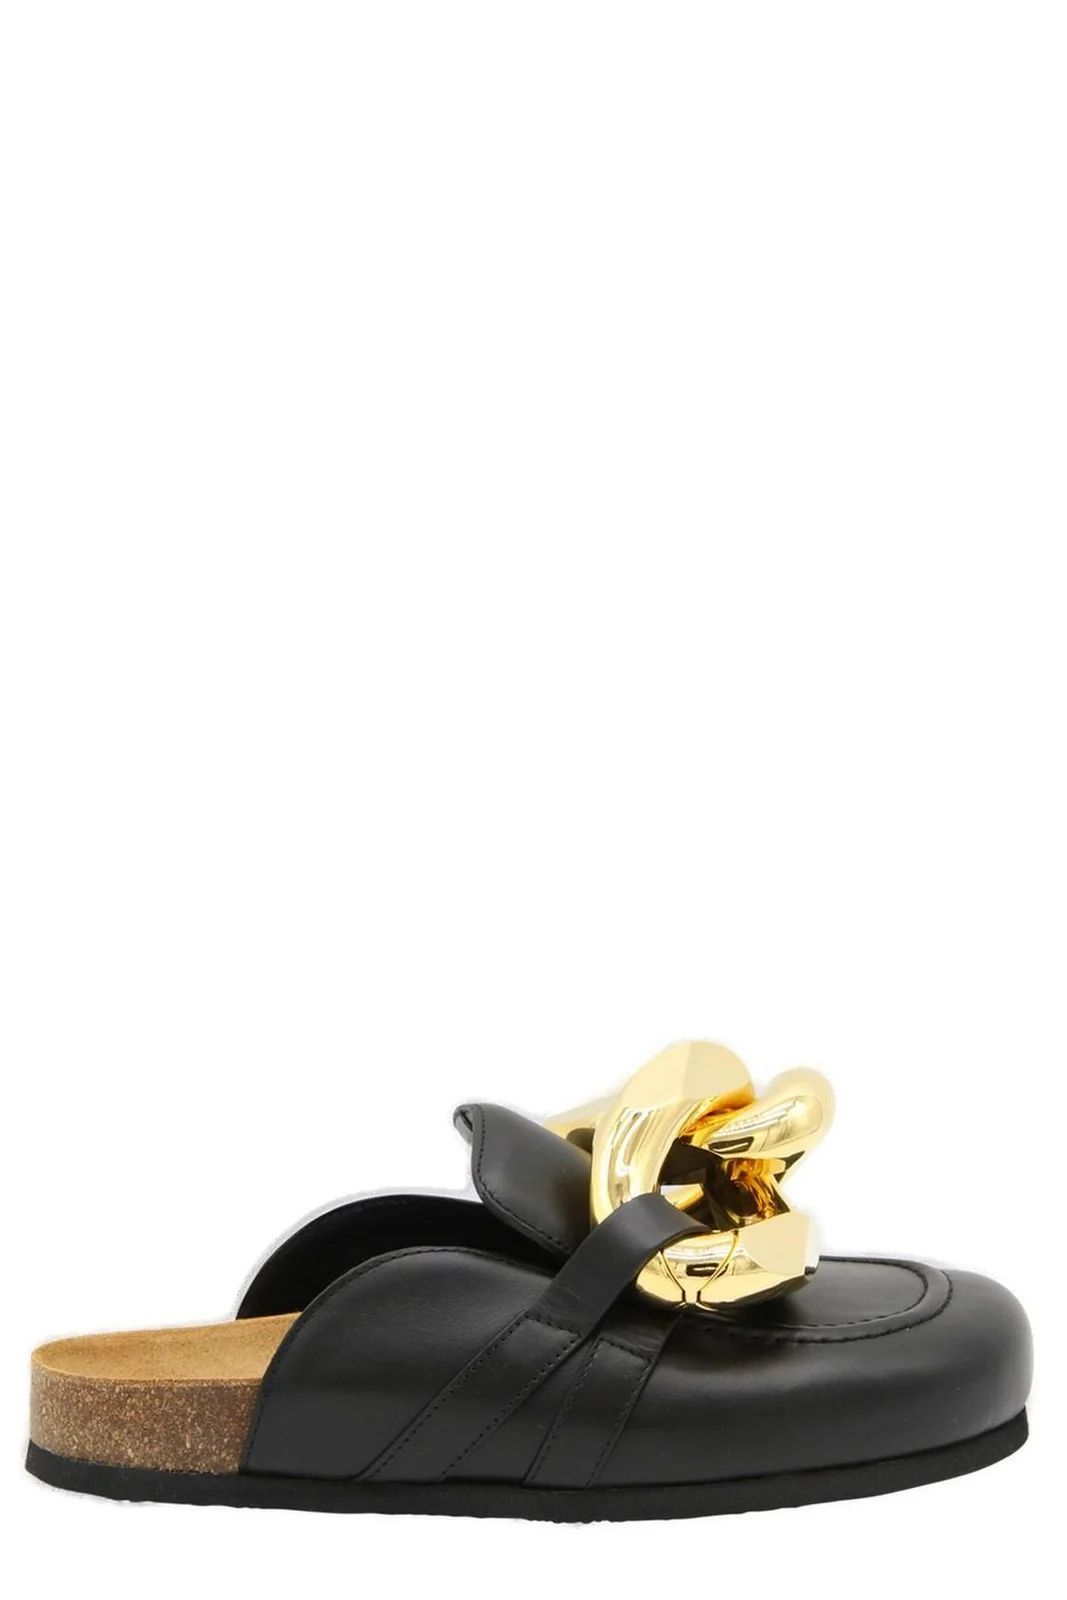 JW Anderson Chain-Detailed Mules | Cettire Global